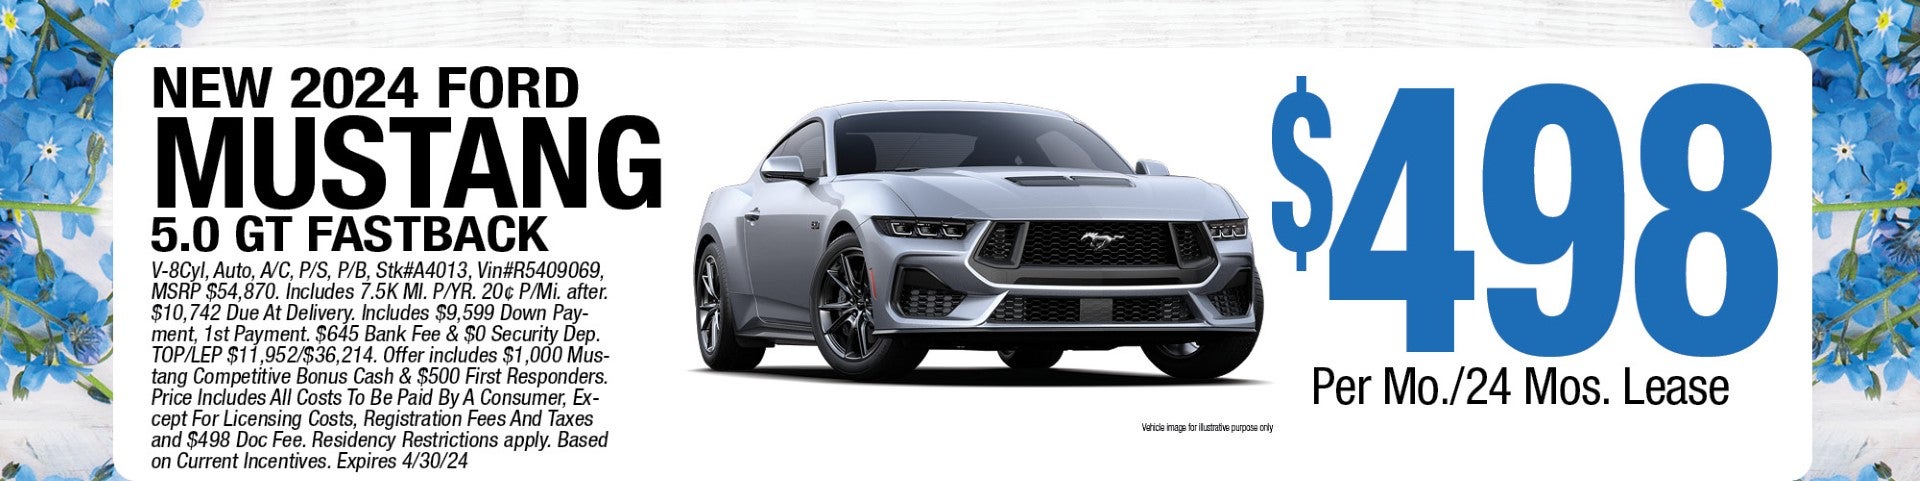 2024_Ford_Mustang